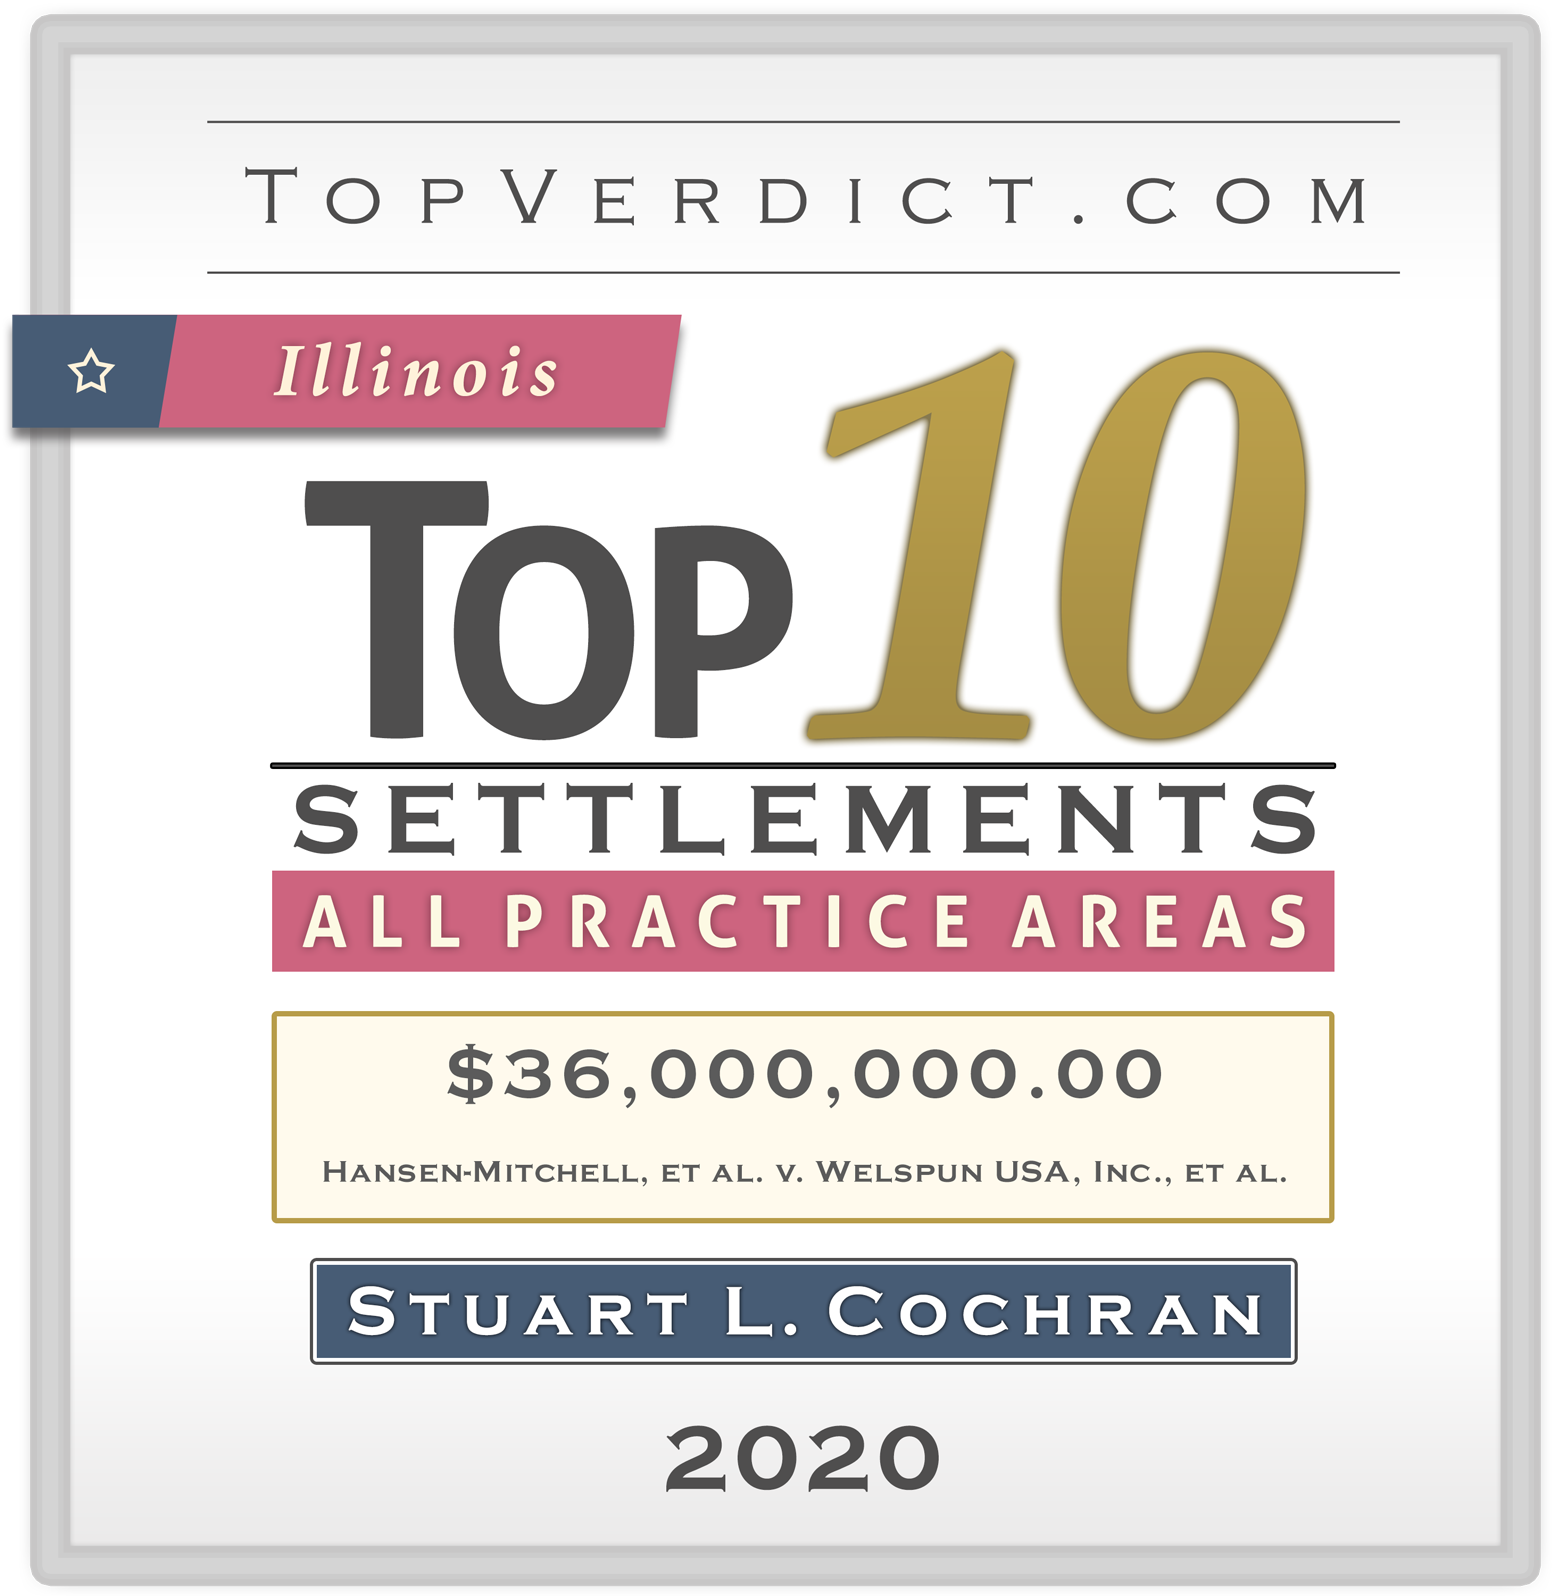 Top 100 Verdicts - TopVerdict.com - Best personal injury lawyer - law office - business lawyer – accident lawyer – Steckler Wayne & Love Law Firm Dallas Waco East TX